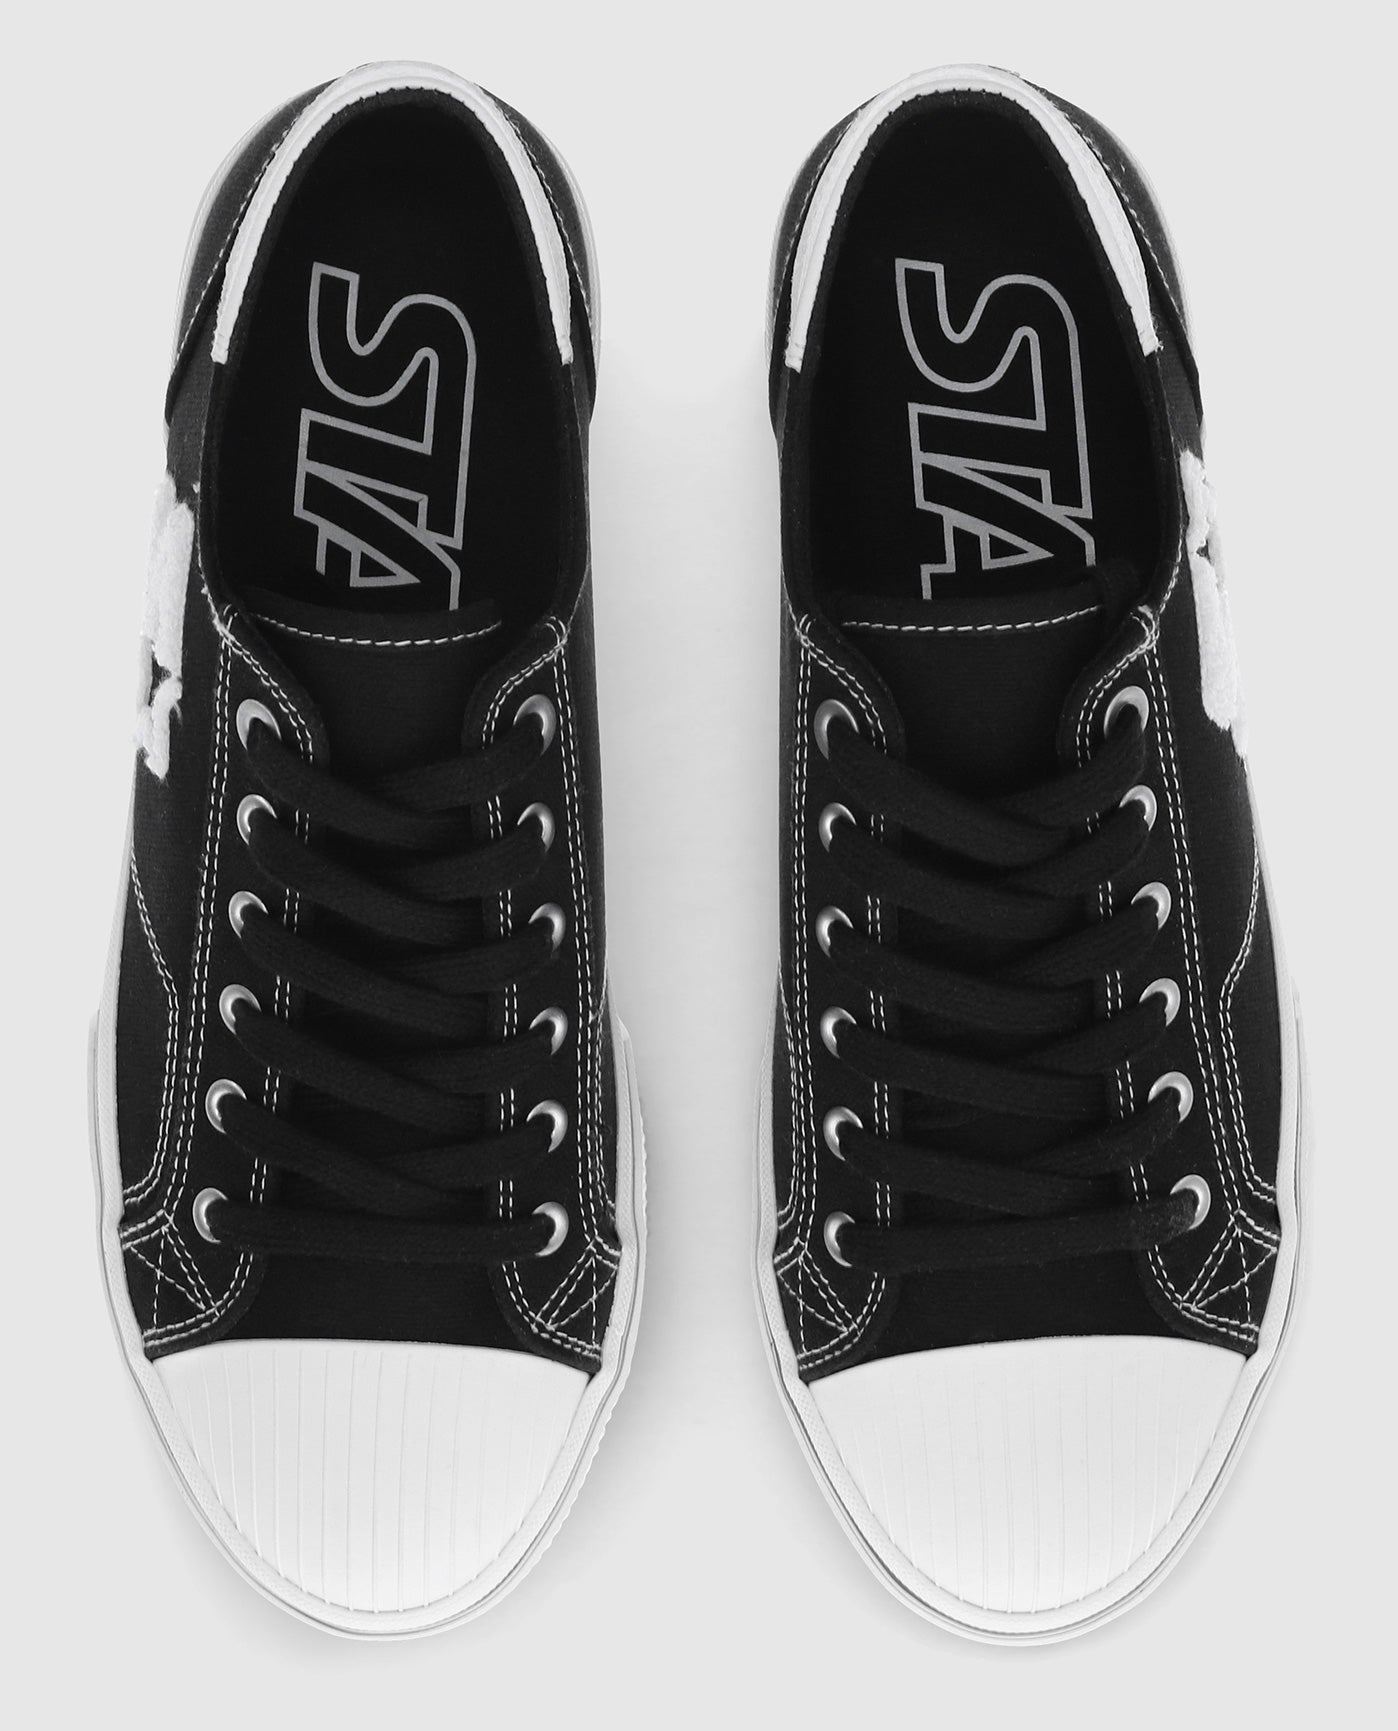 Top Angle Of Starter Tradition 71 Low Black Sneaker Pair | Black